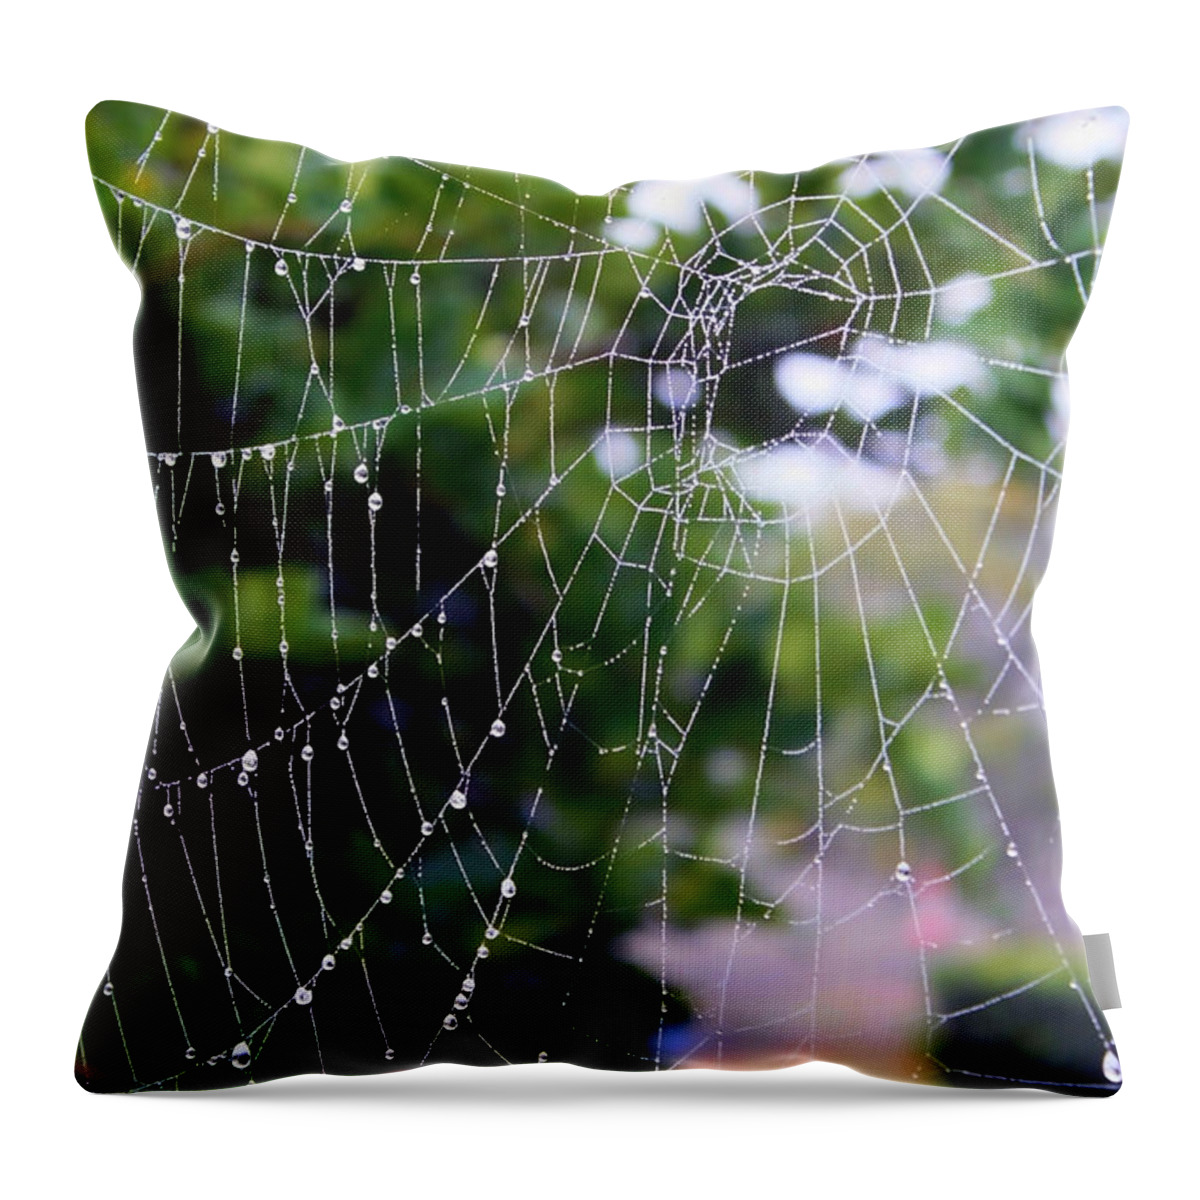 Dewdrops On Spider Web Throw Pillow featuring the photograph Dewdrops Dimension by Carol Groenen